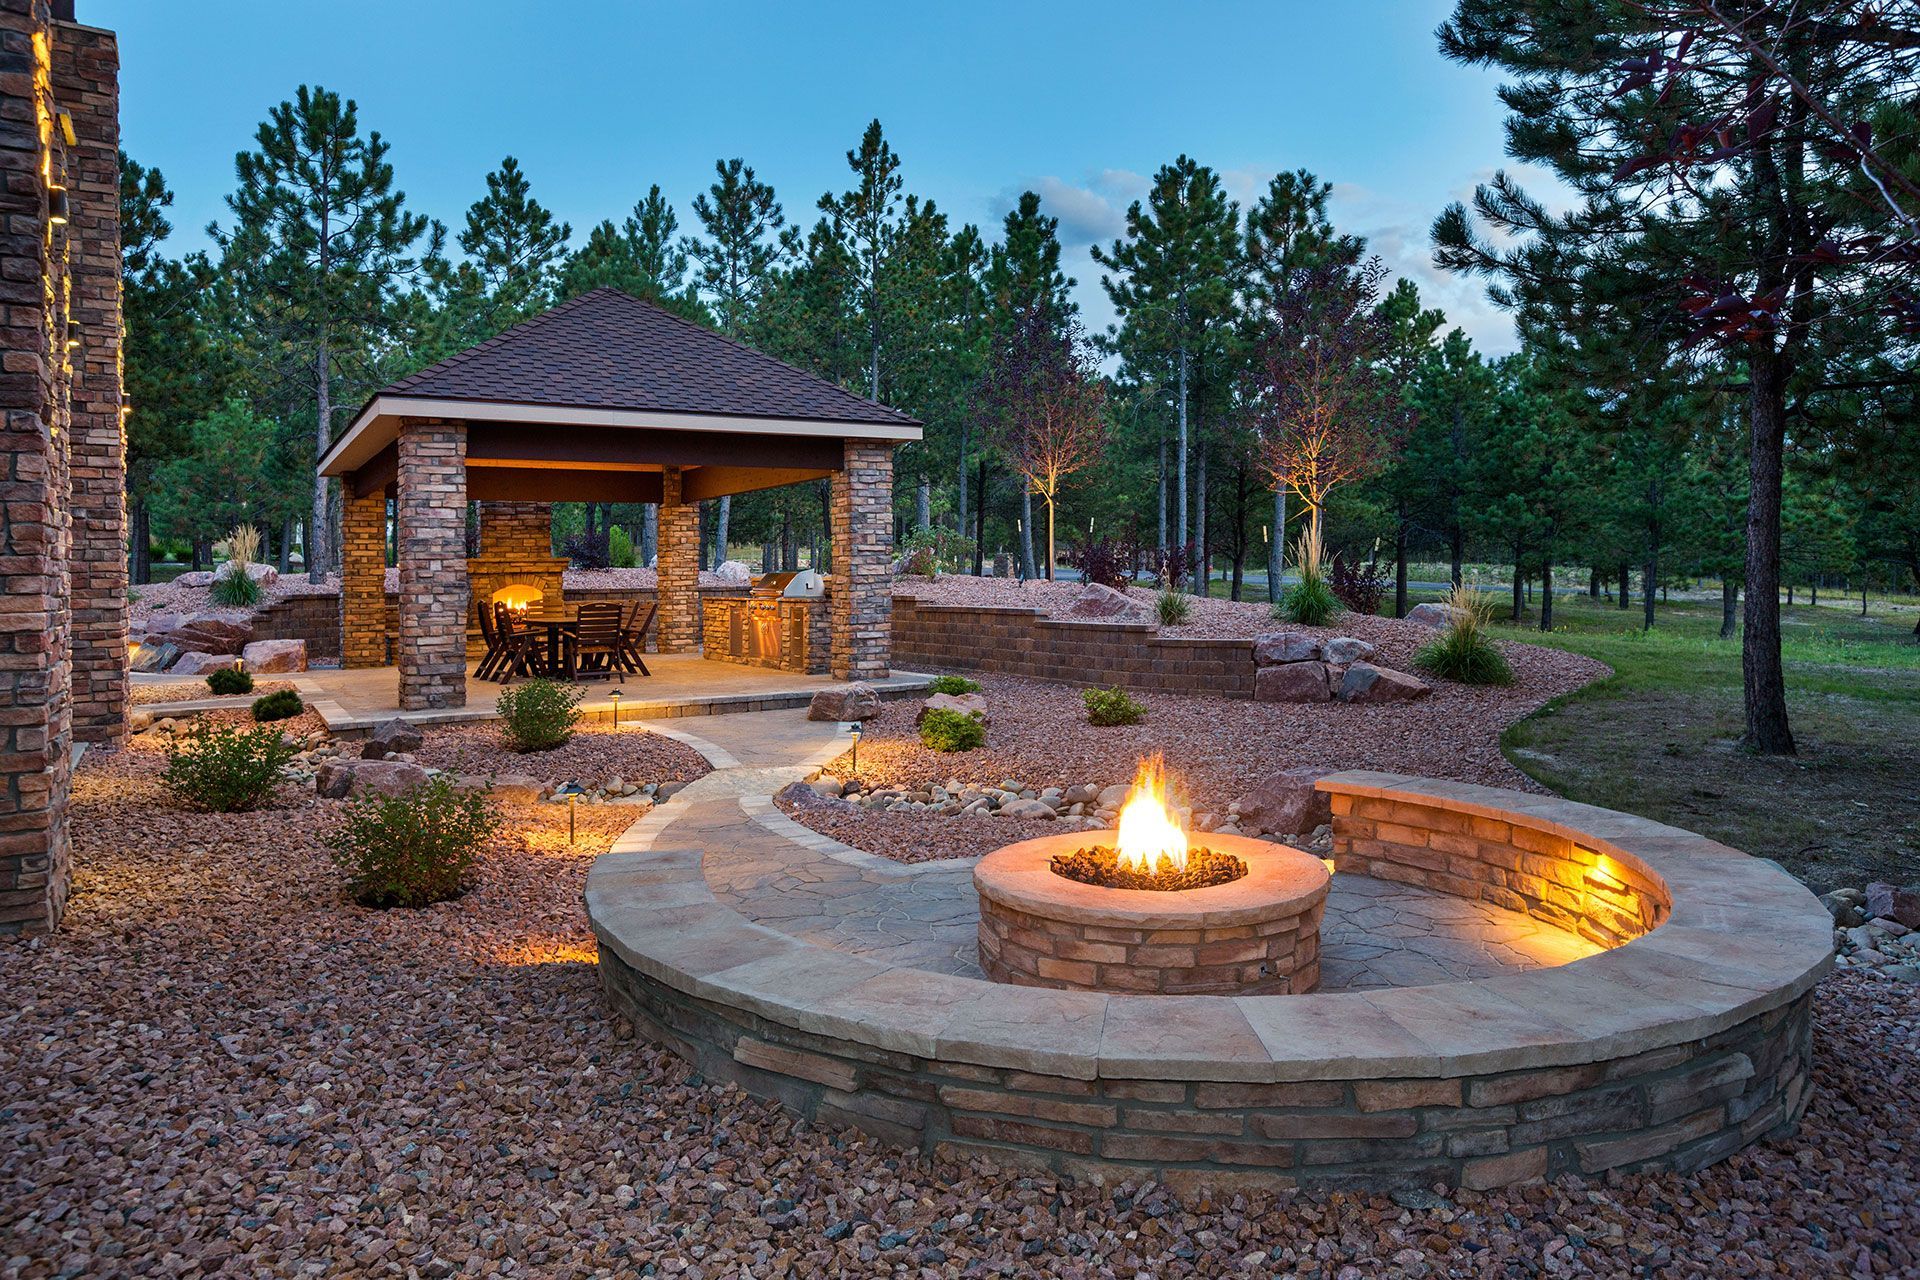 Outdoor fireplace on patio and walkway